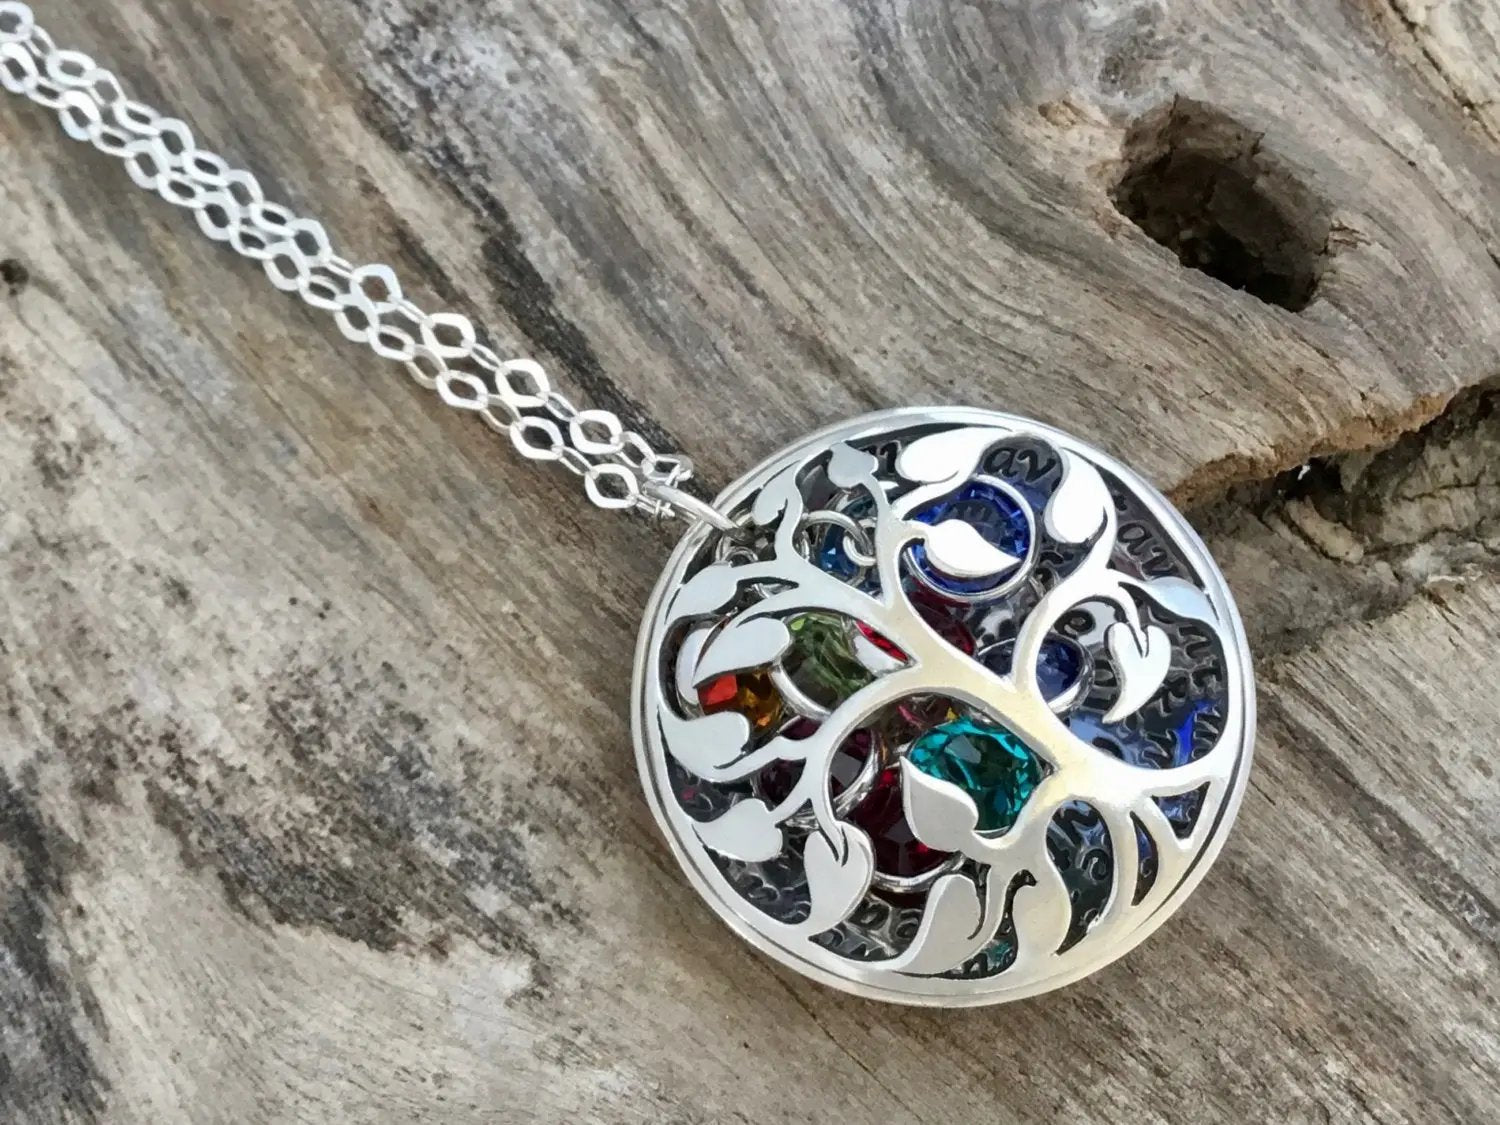 Multiple Birthstone Necklace